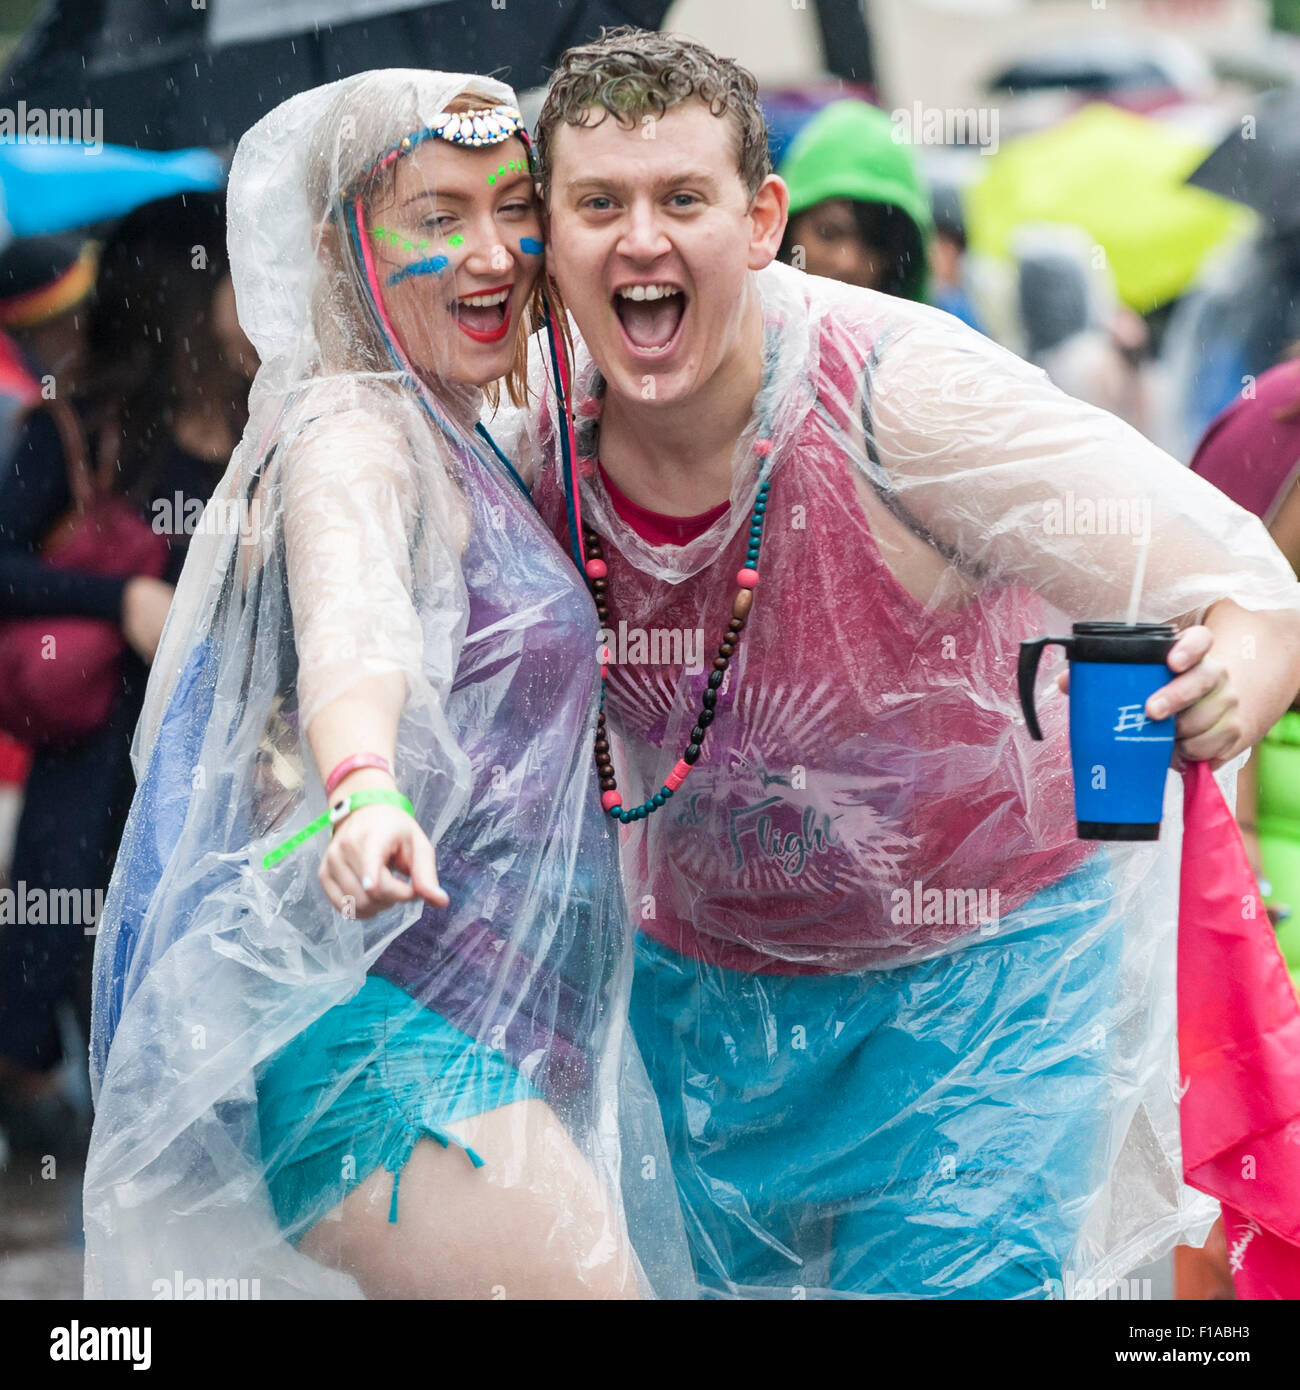 London, UK. 31 August 2015. A couple in ponchos in the heavy rain enjoy day  two of Notting Hill Carnival in west London. Credit: Stephen Chung / Alamy  Live News Stock Photo - Alamy